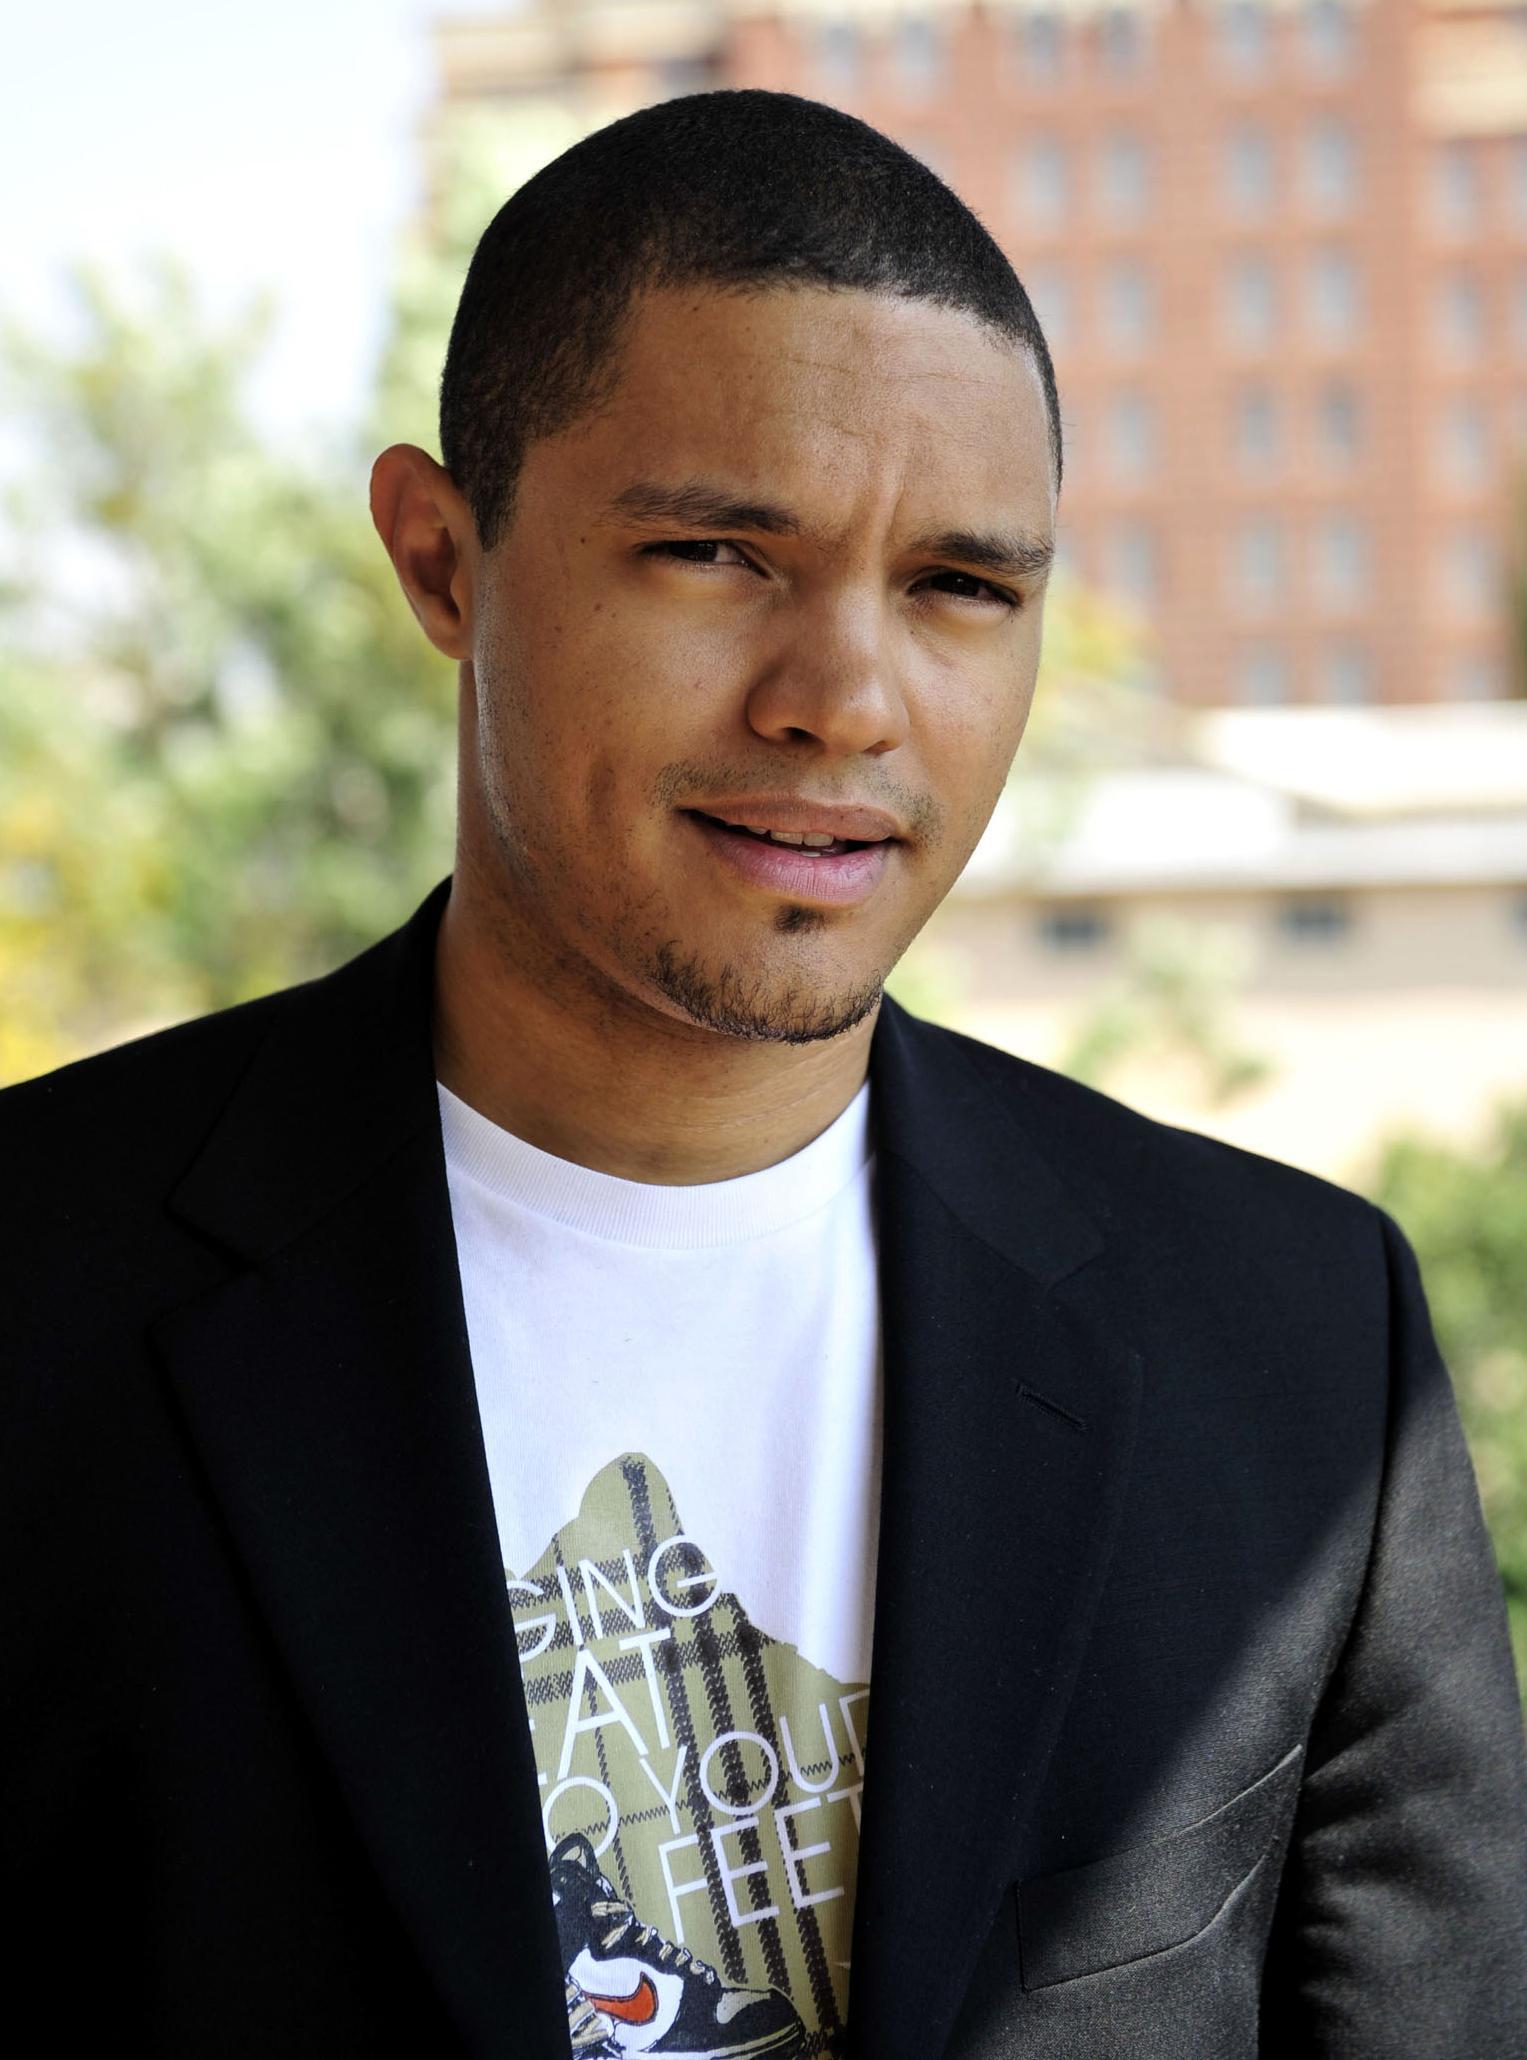 Trevor Noah, new 'Daily Show' host, faces backlash for tweets about